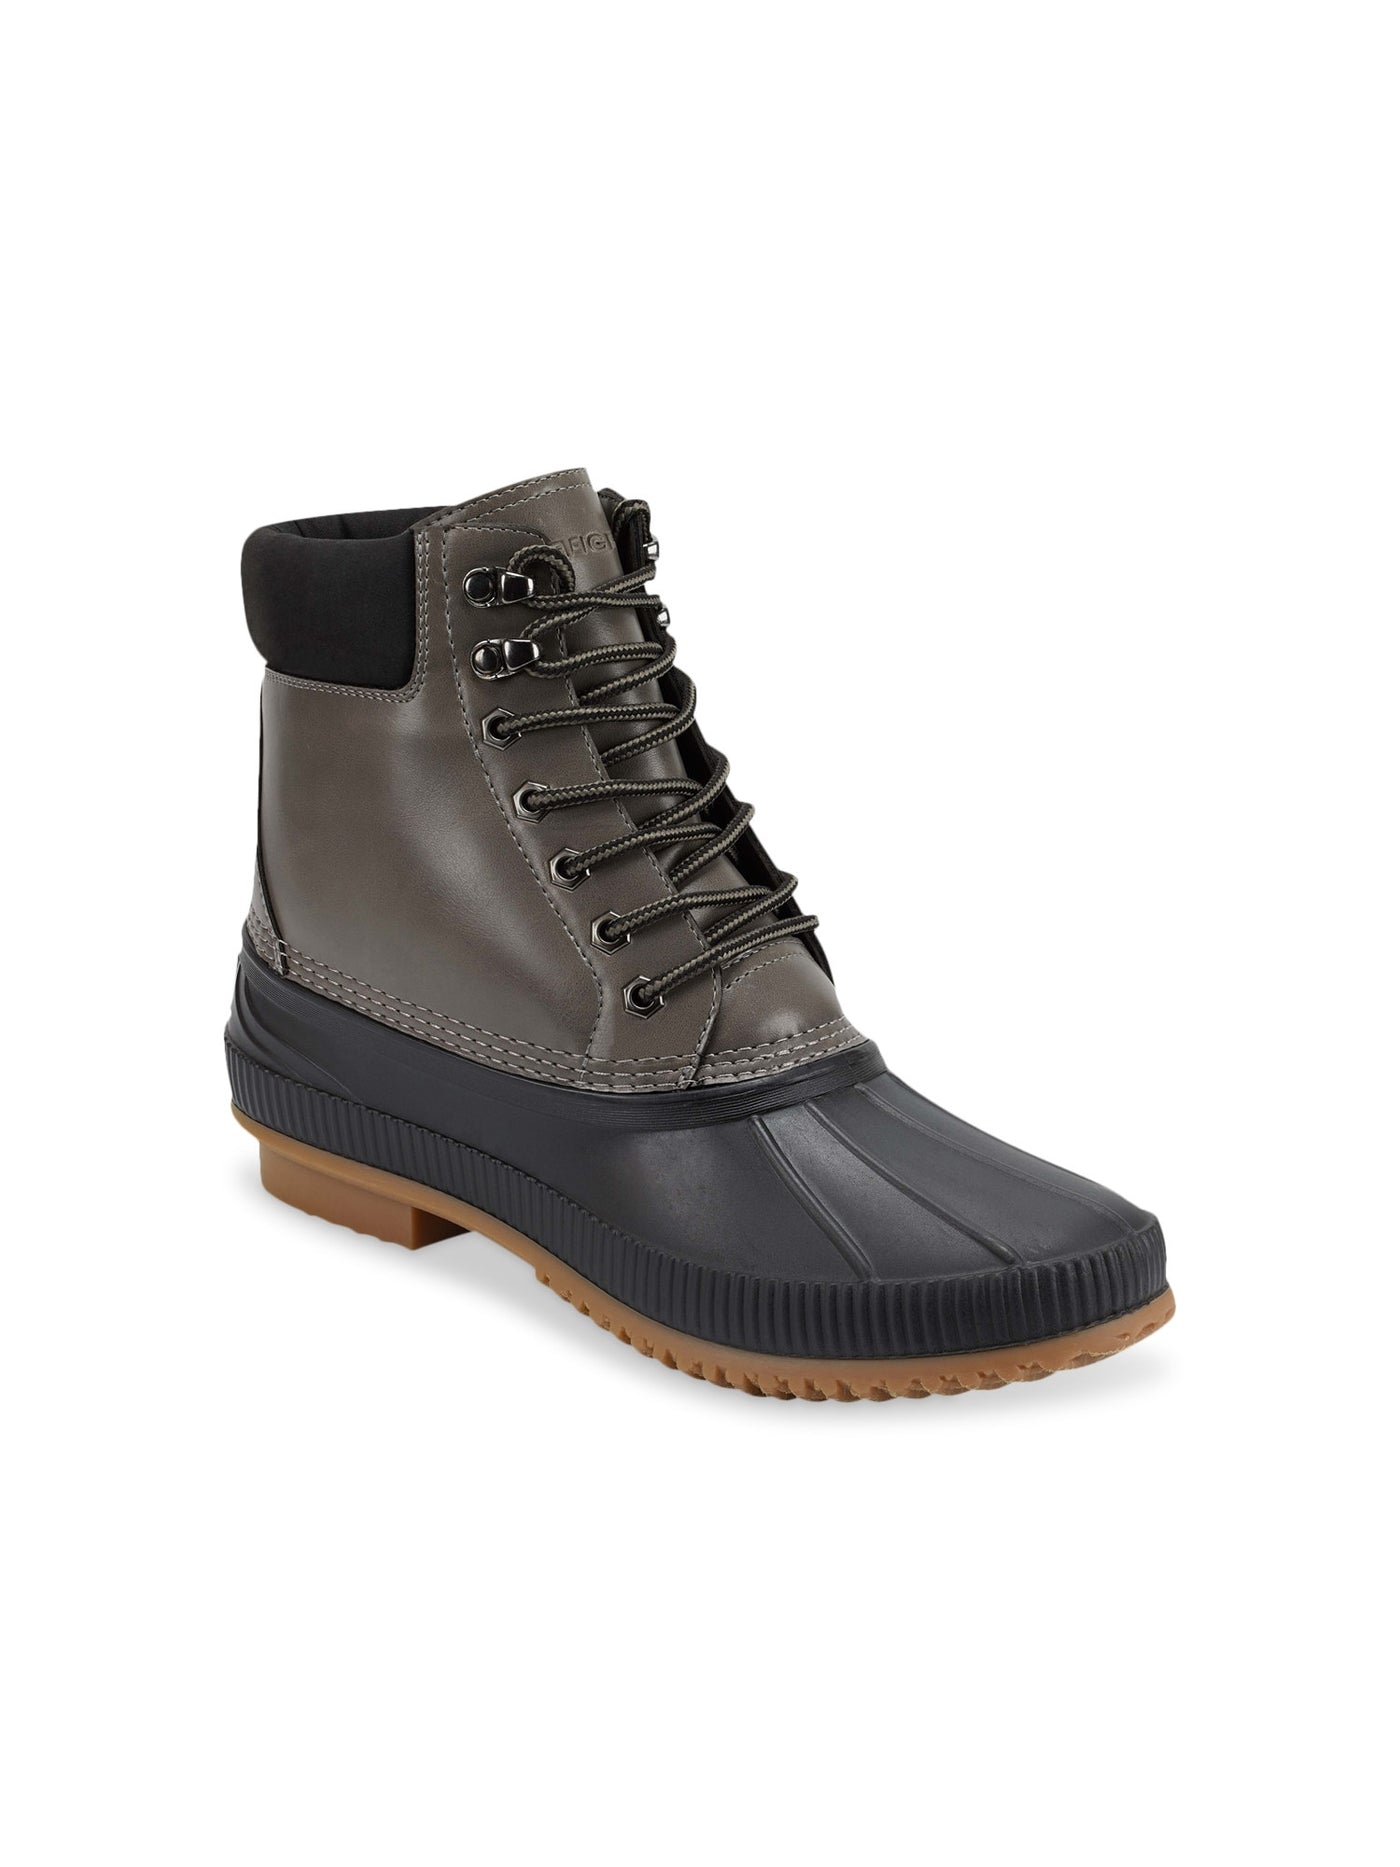 TOMMY HILFIGER Mens Gray Color Block Cushioned Collar Waterproof Padded Colins 2 Round Toe Lace-Up Duck Boots 8